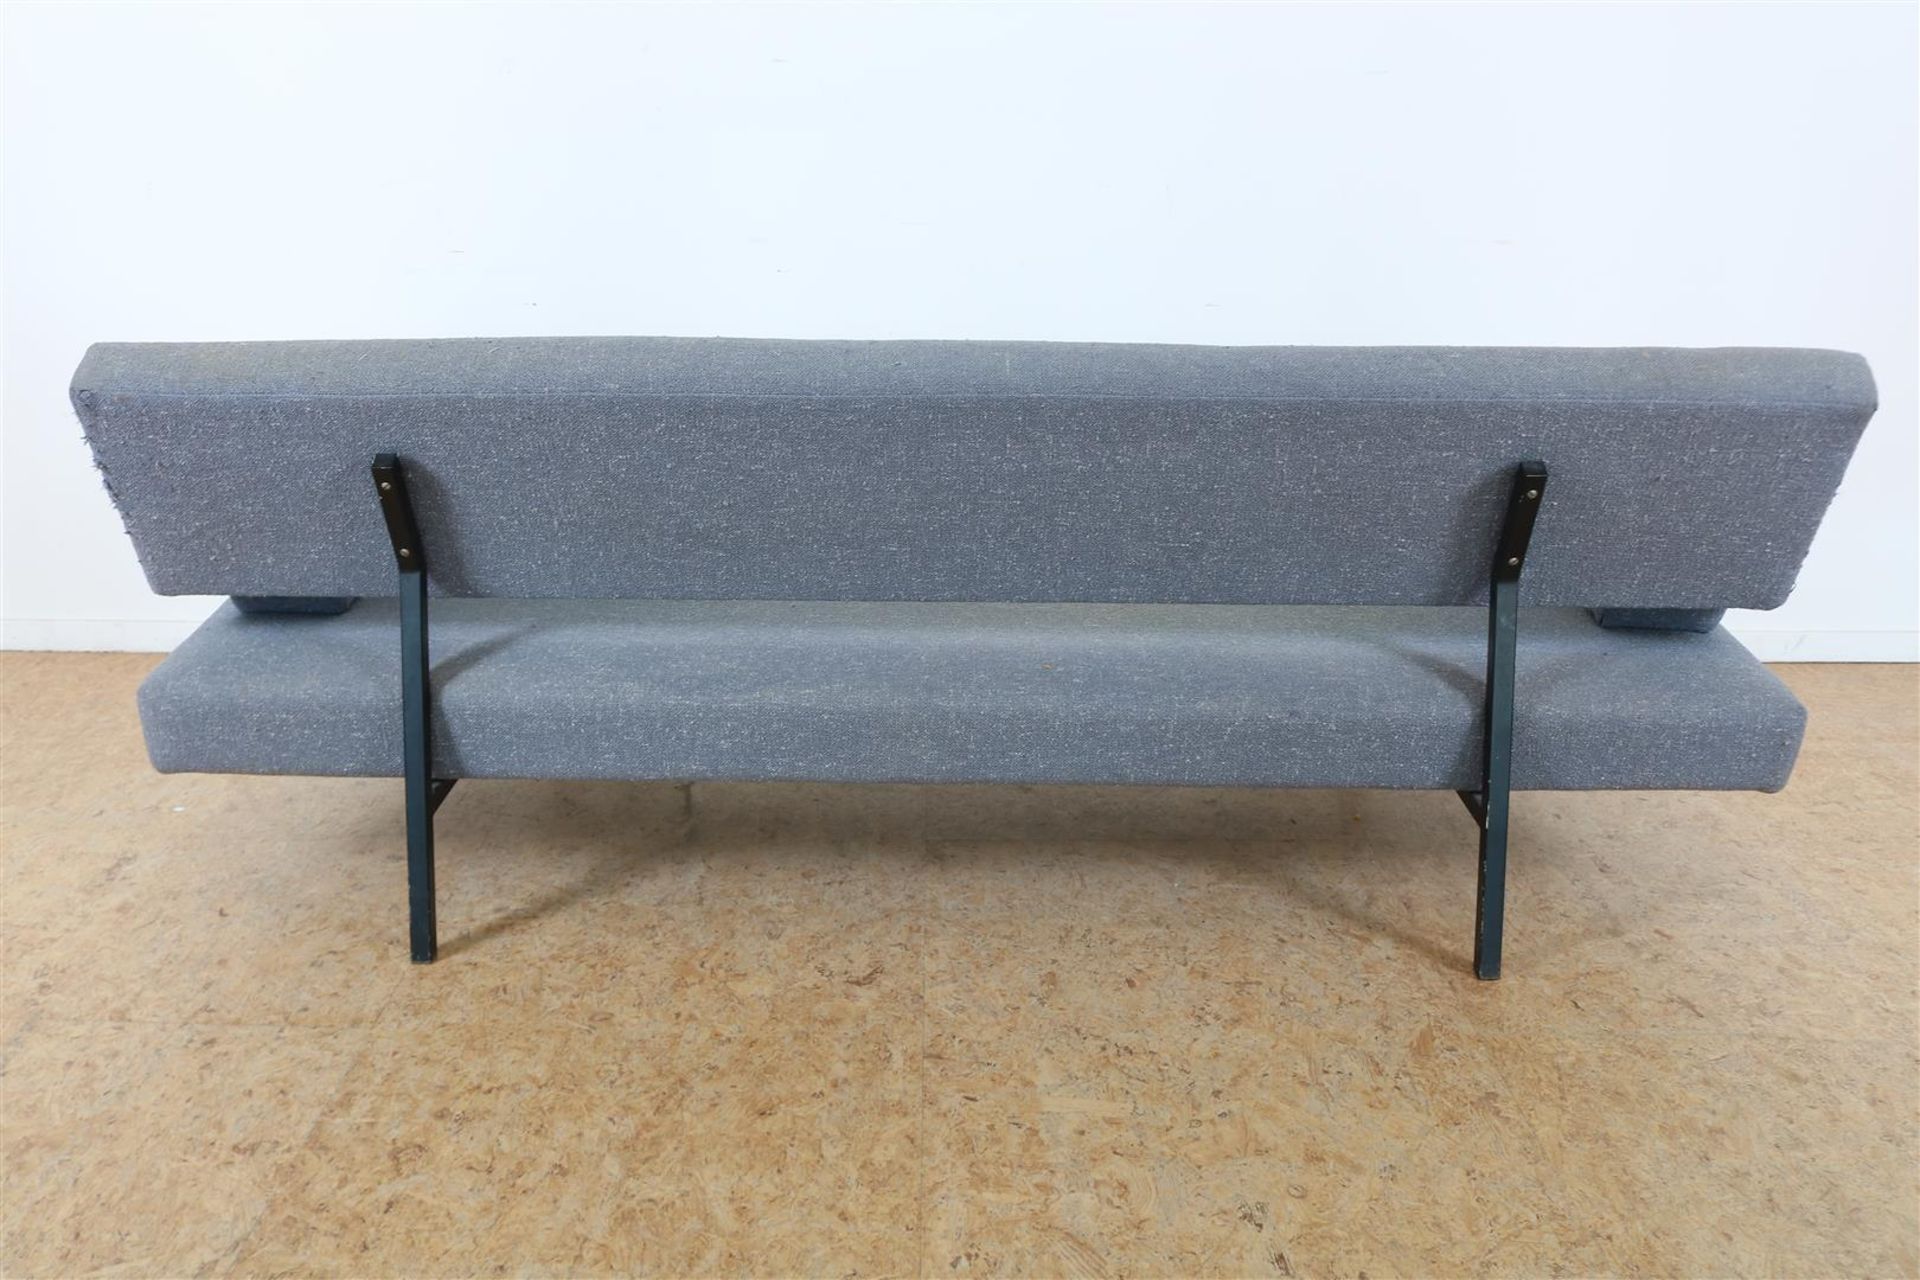 Designer sofa bed with gray wool upholstery and 2 loose cushions on a black base, Martin Visser, - Image 4 of 8